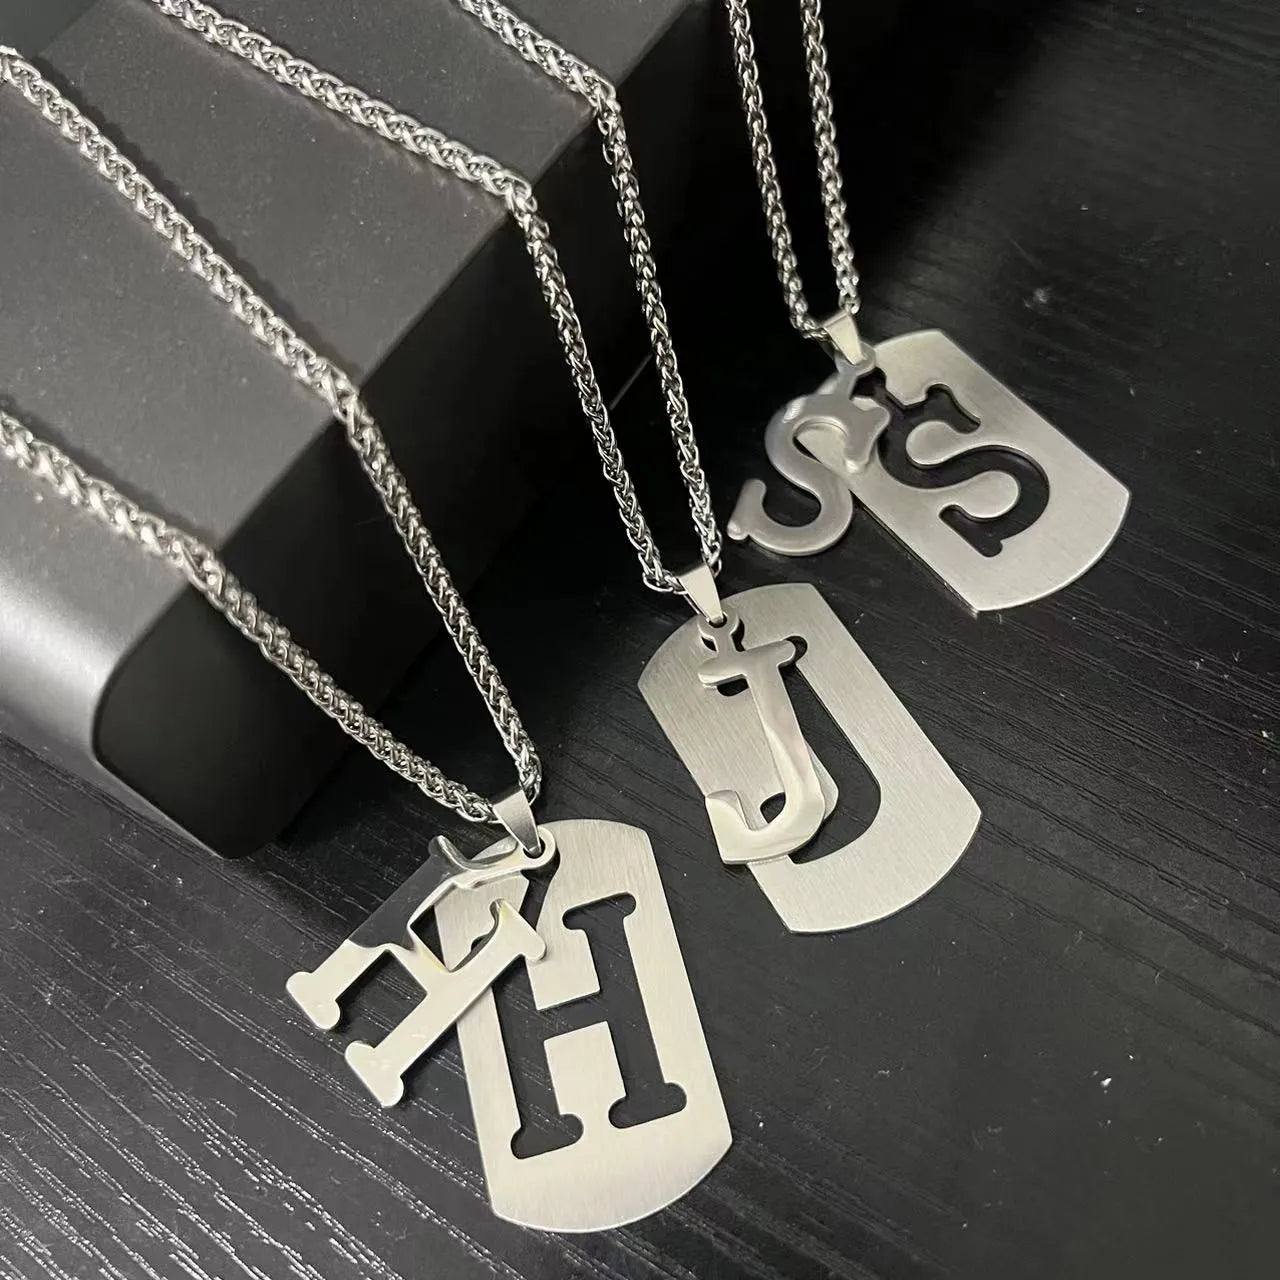 HNSP Initials Letter Stainless Steel Pendant For Men Male Necklace Jewelry Accessories Cat, Dog Name Neck